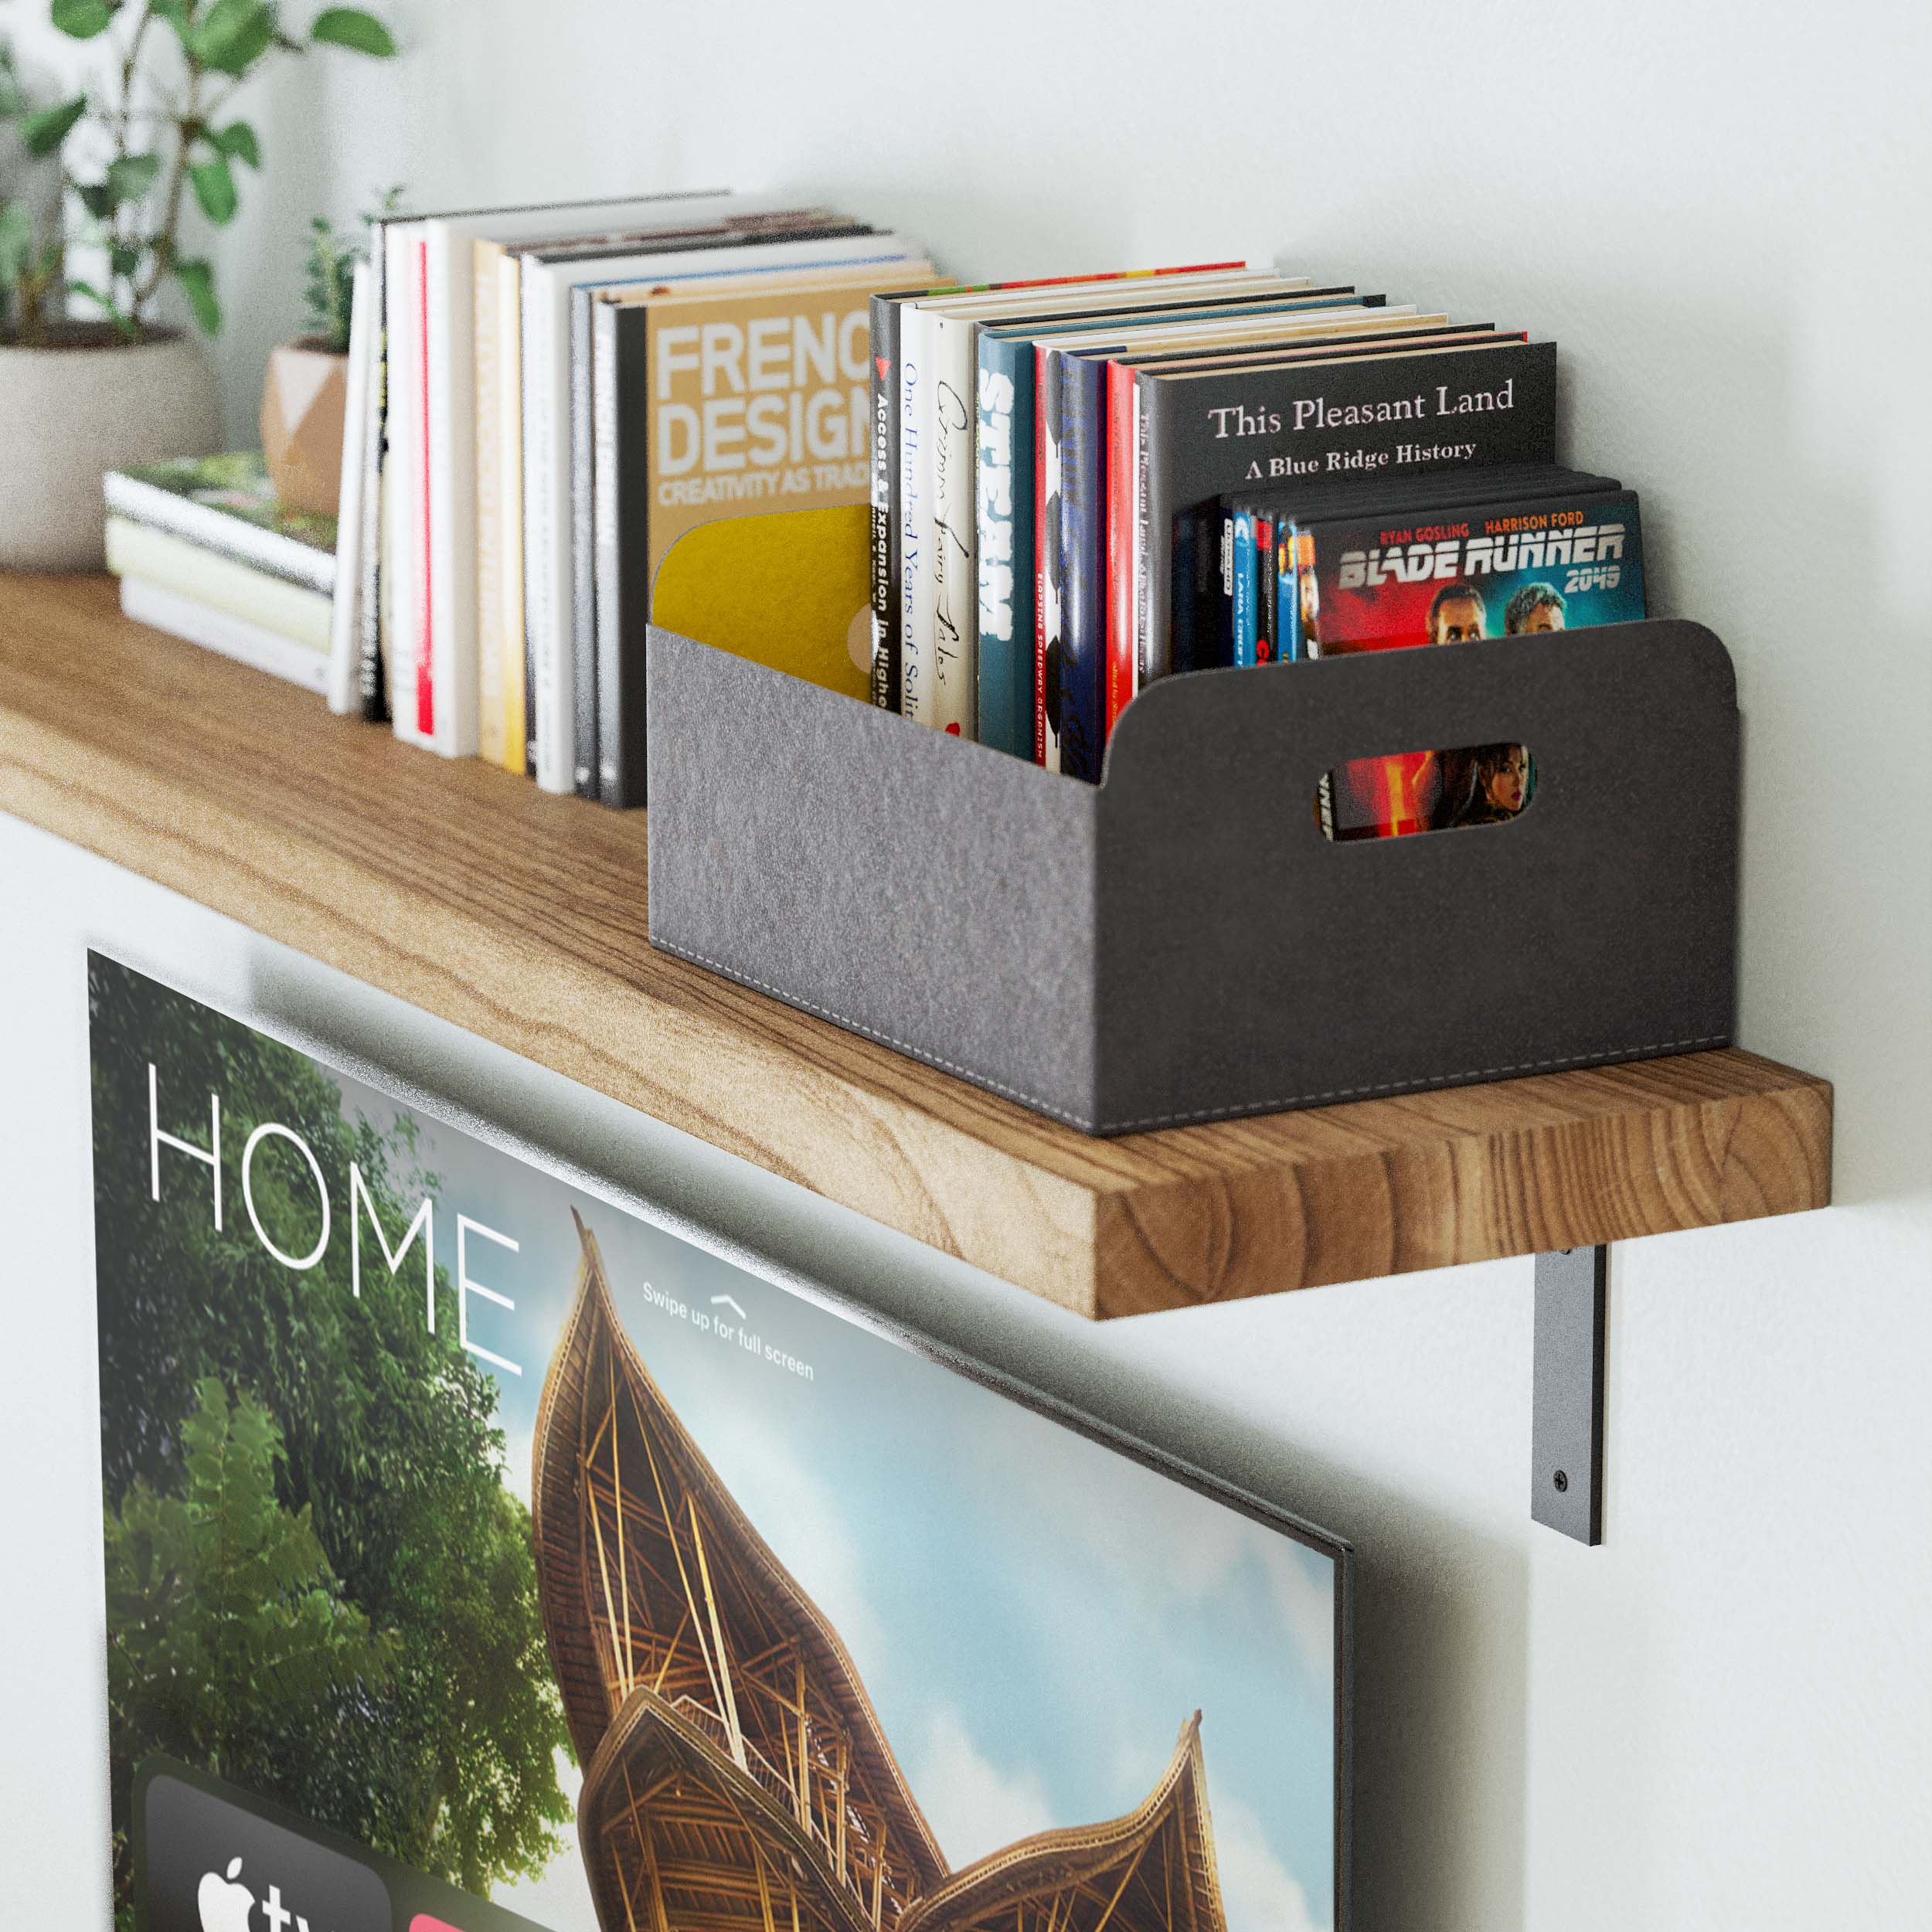 A close-up of a floating book shelf with a variety of books and a felt organizer box, mounted above a TV screen with "HOME" on the display.